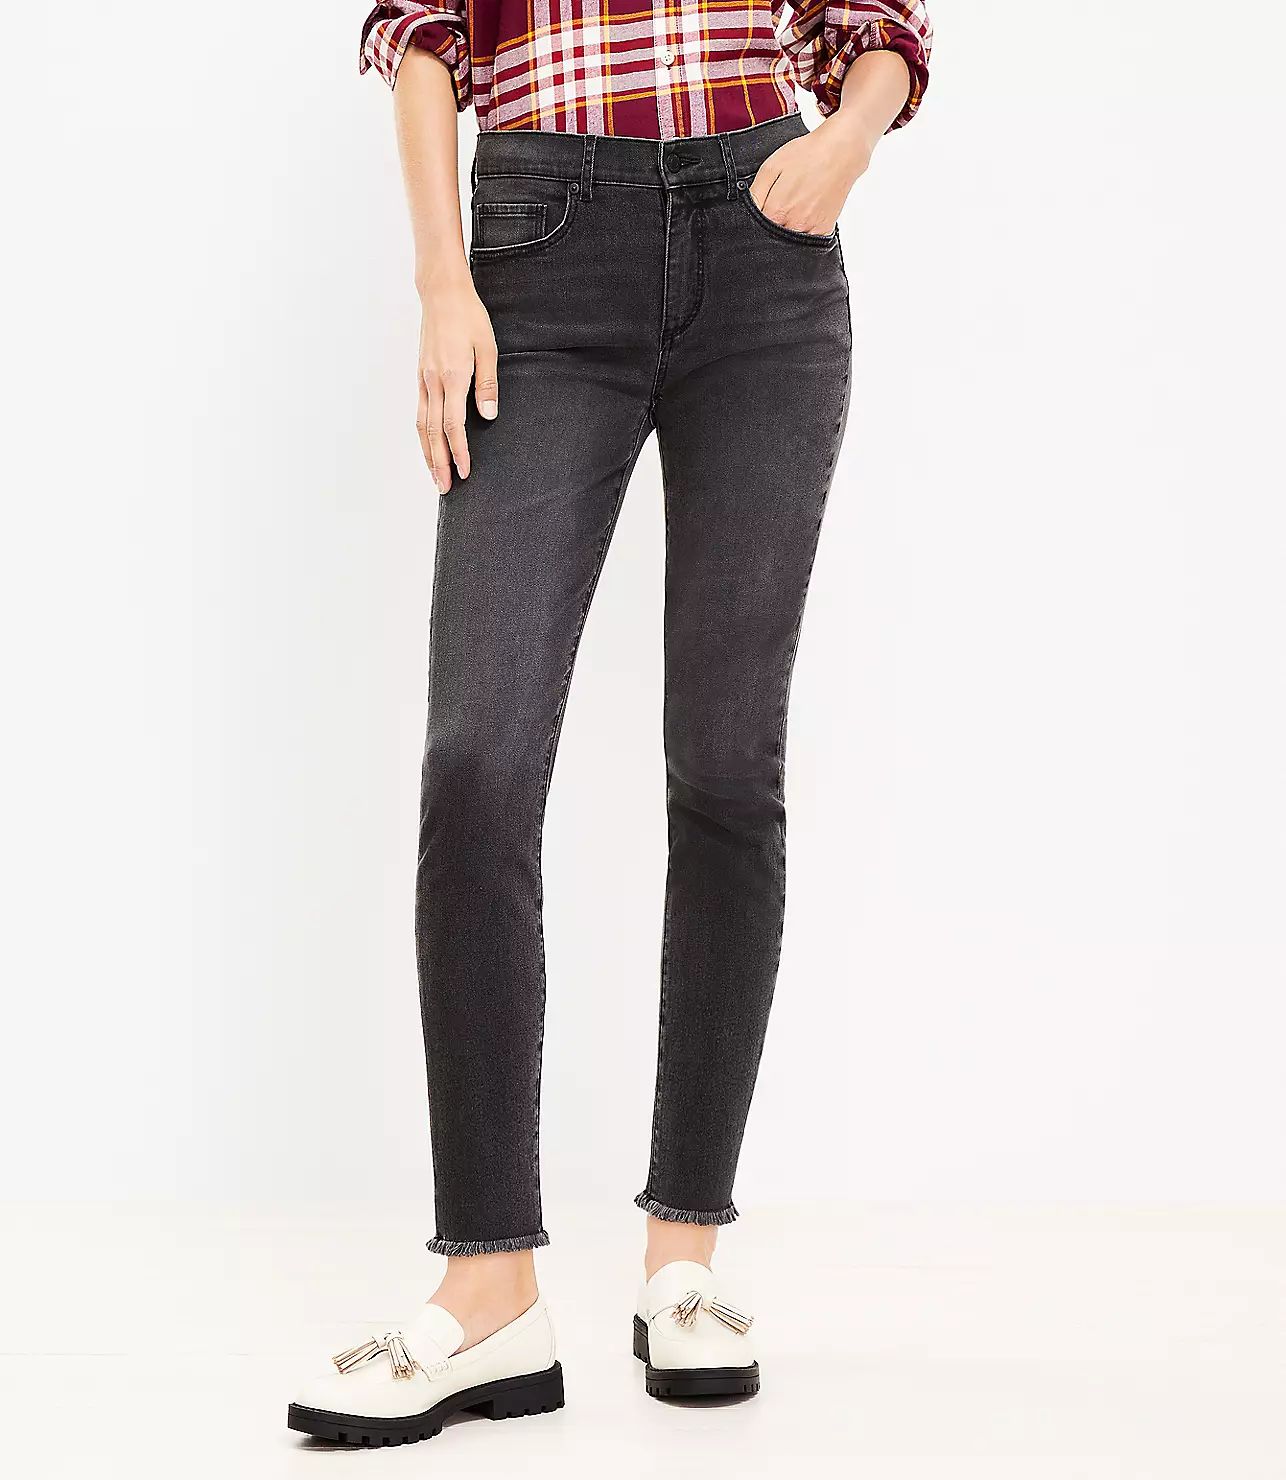 Frayed Mid Rise Skinny Jeans in Washed Black Wash | LOFT